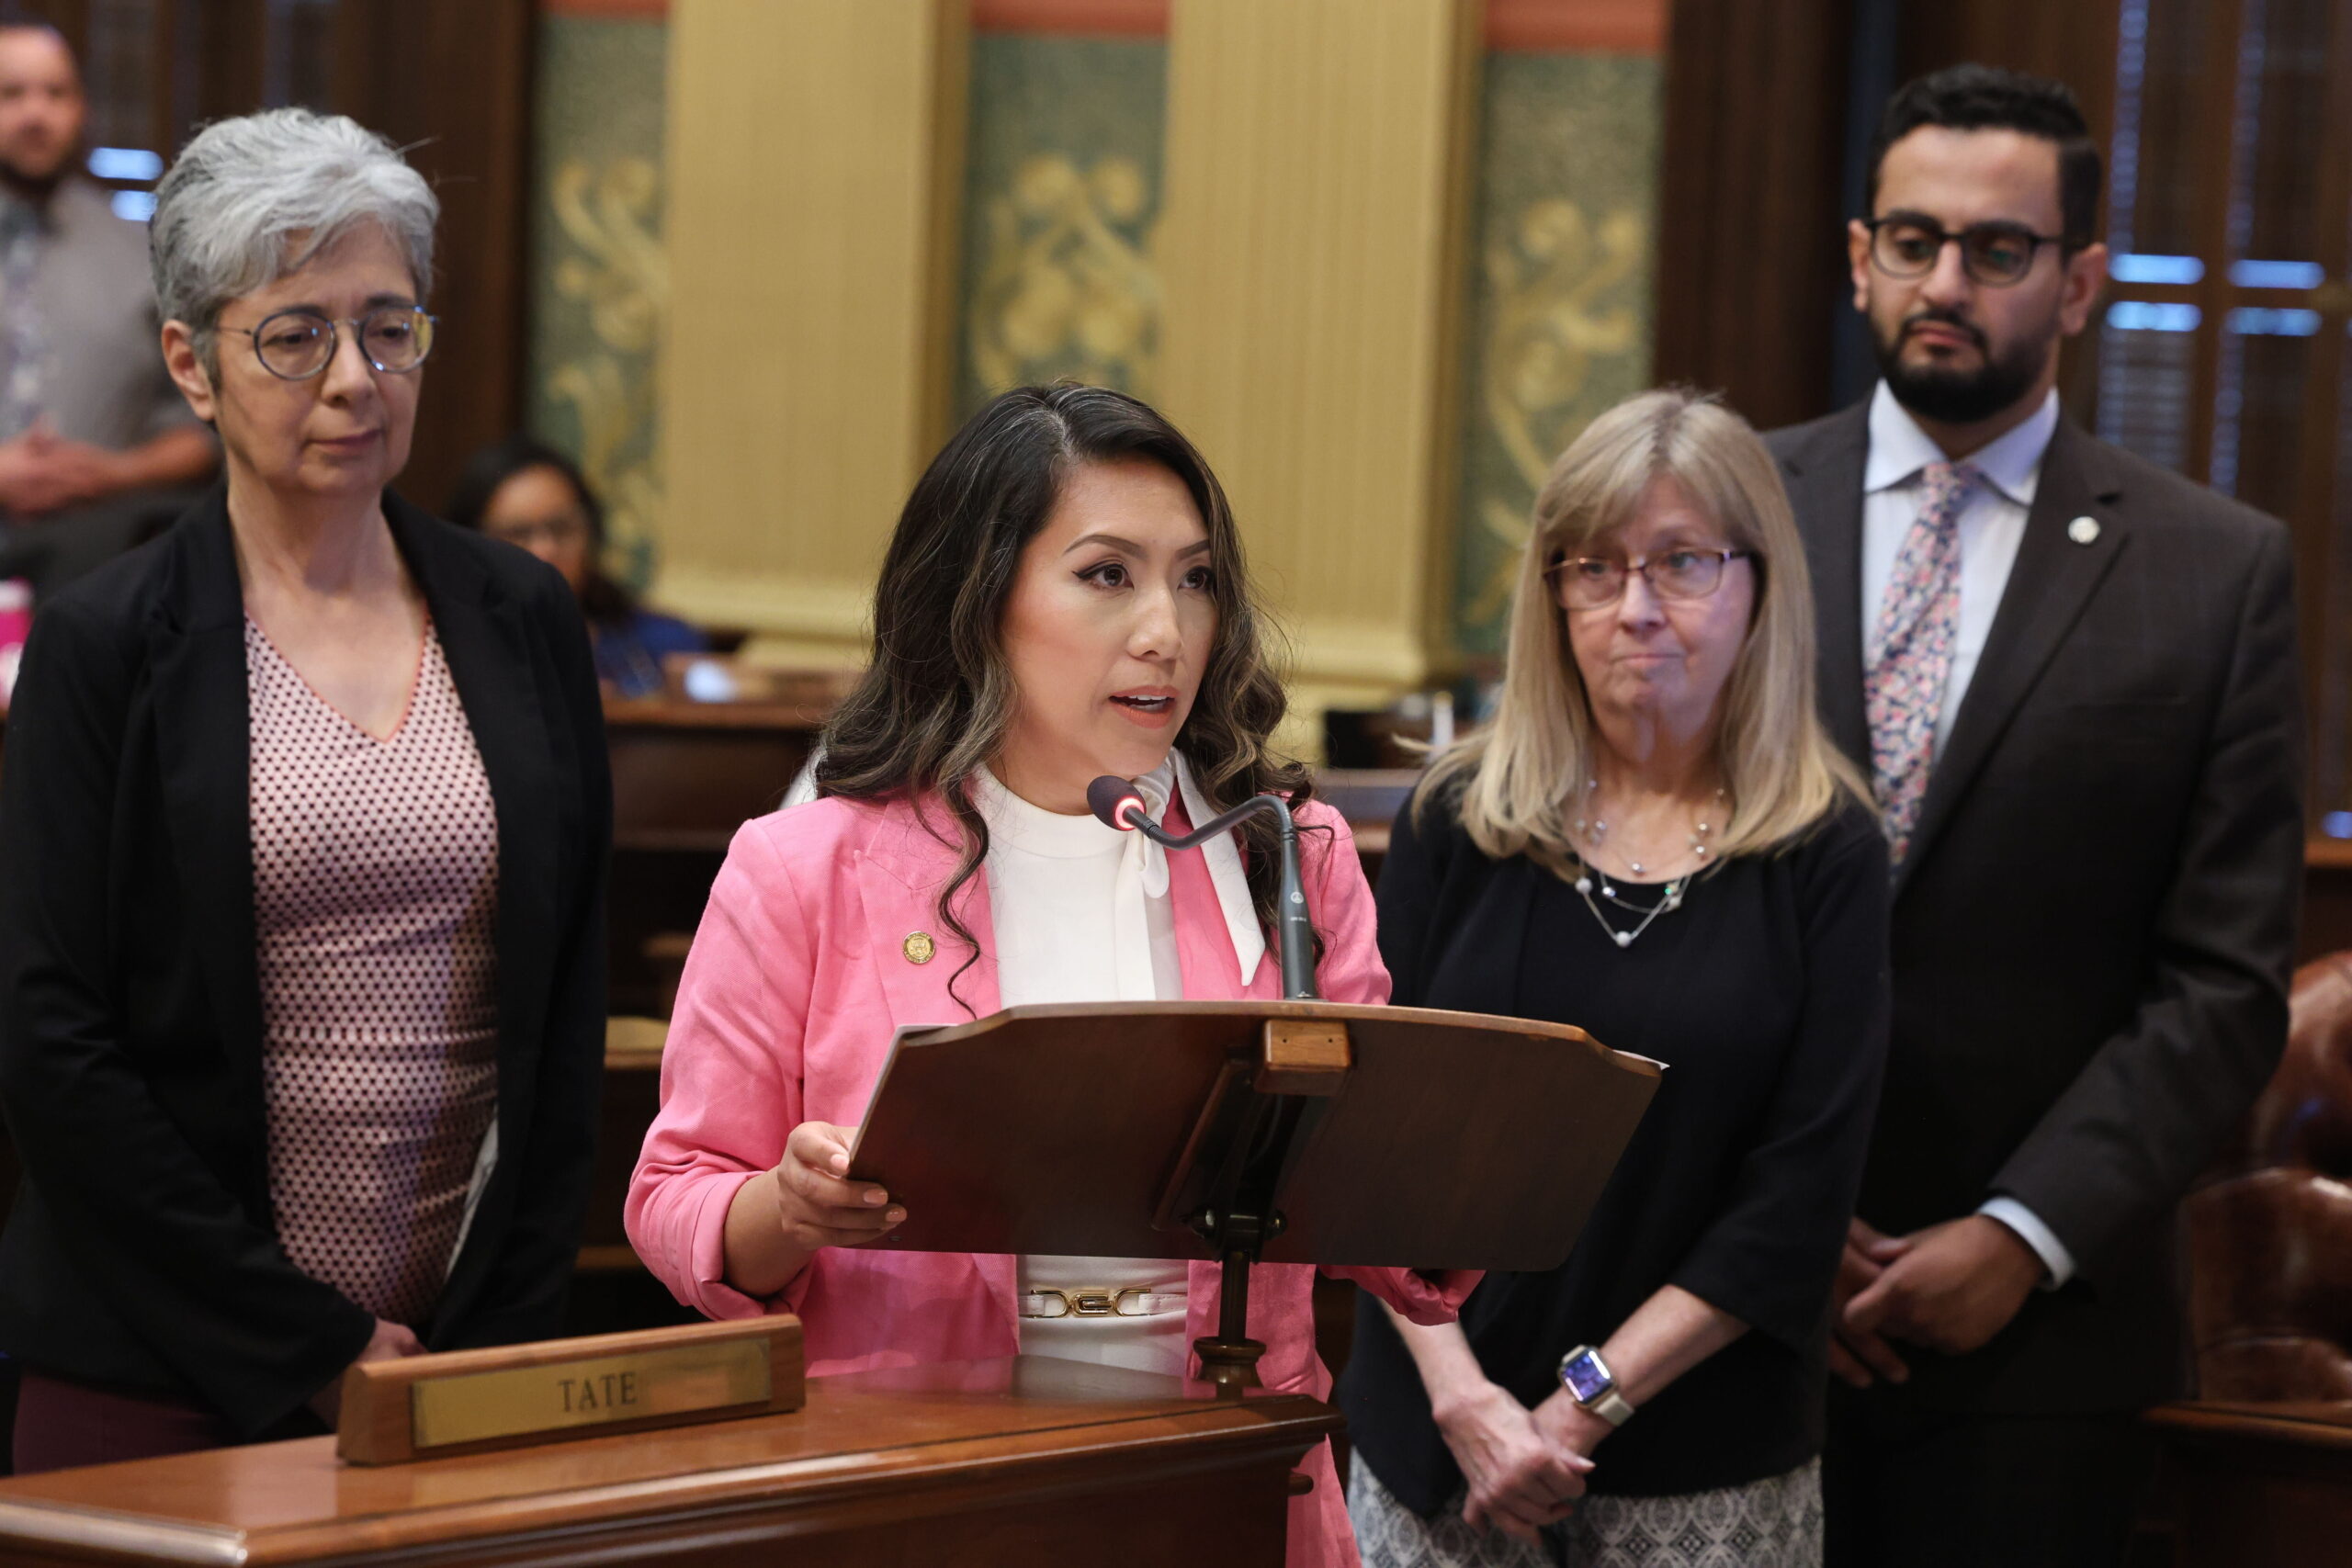 Michigan state Representative Mai Xiong stands at a podium between her colleagues, speaking on the House Floor in the Michigan Capitol Building.